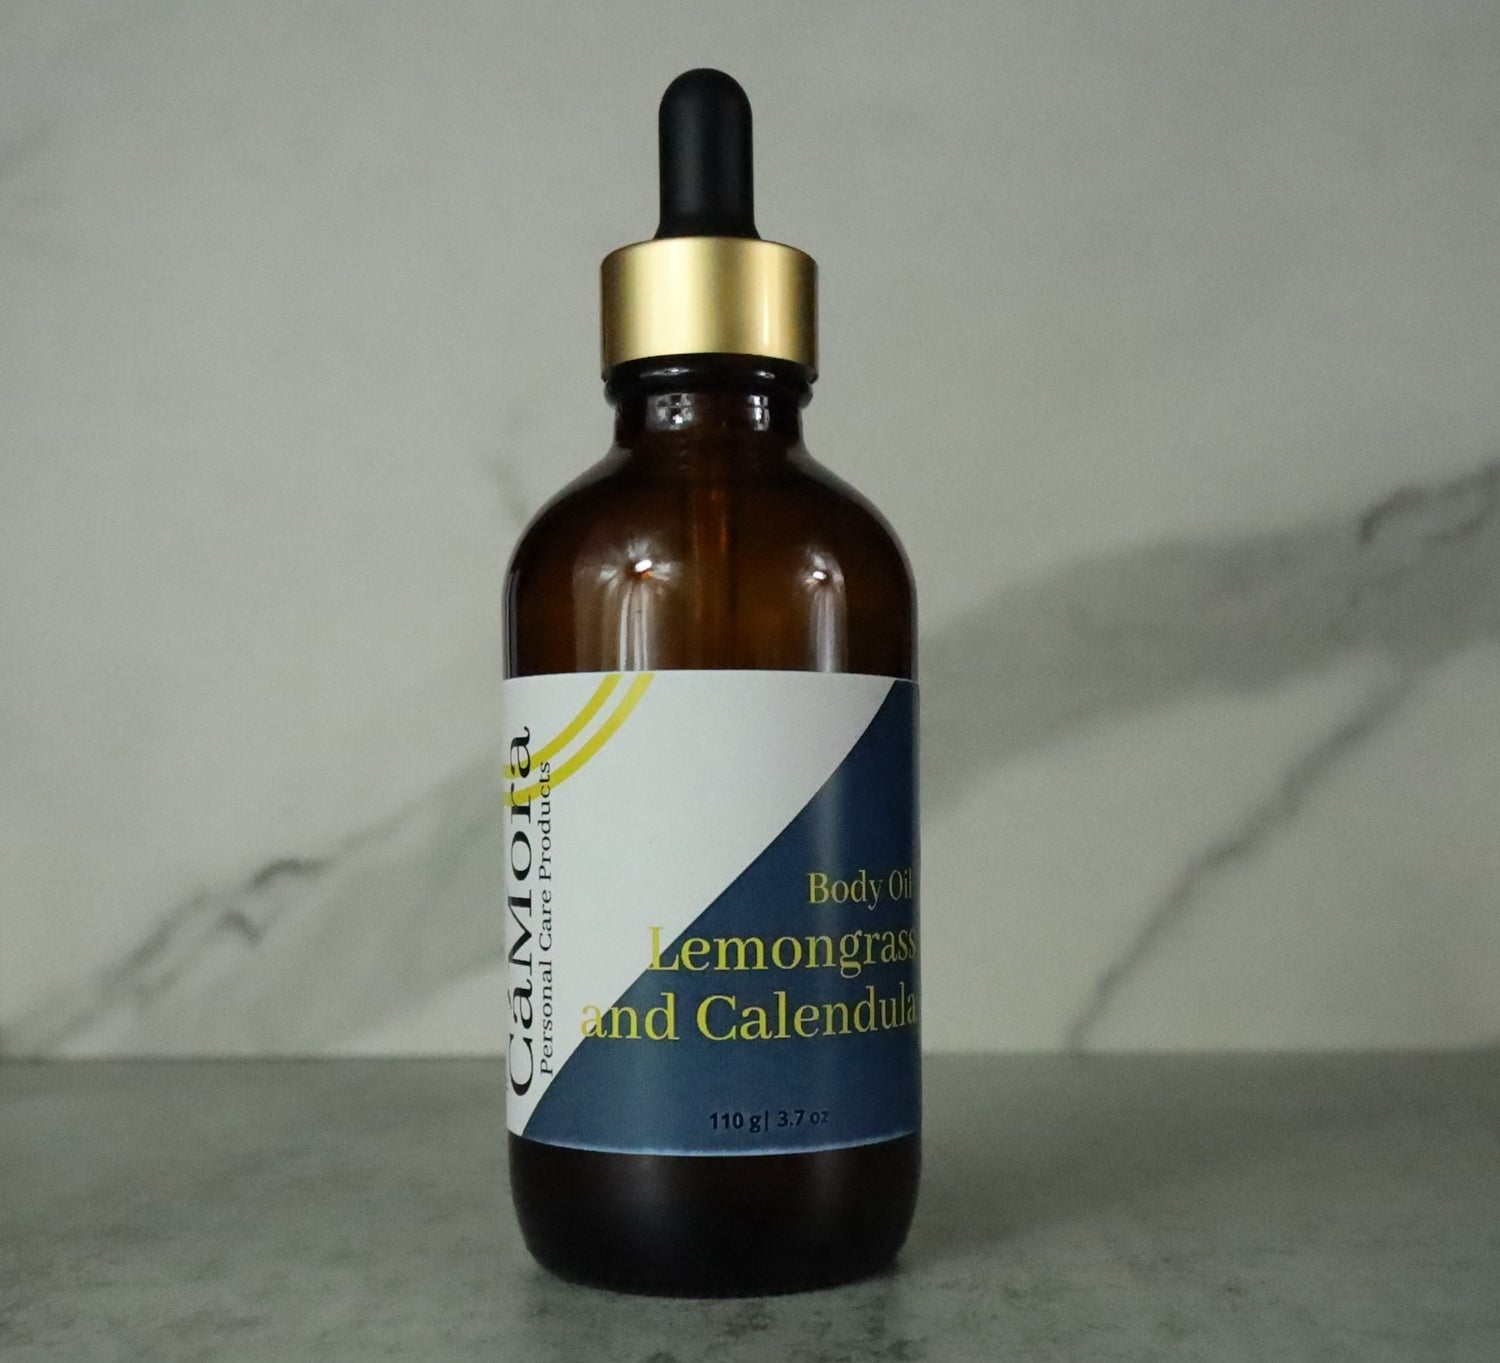 Lemongrass and Calendula organic body oil, 4 ounce bottle, infused with organic herbs and essential oils.